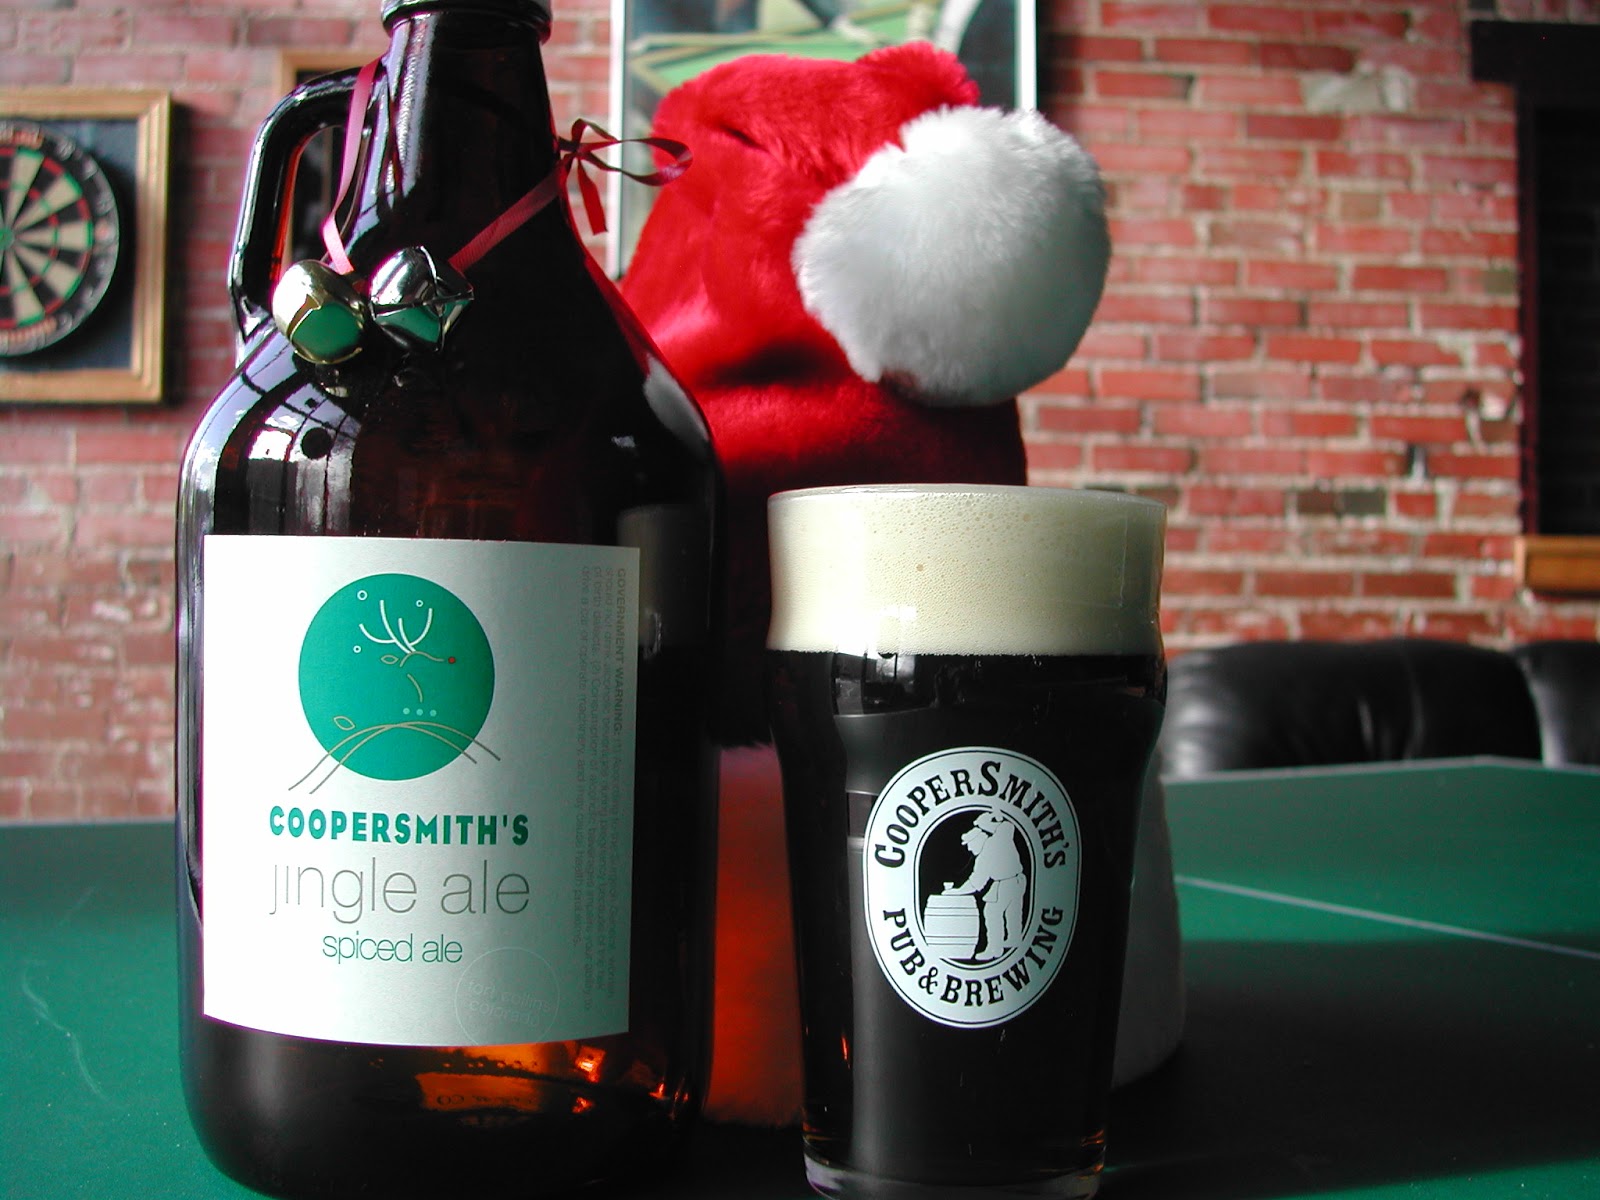 jingle ale growler next to santa hat and pint of beer